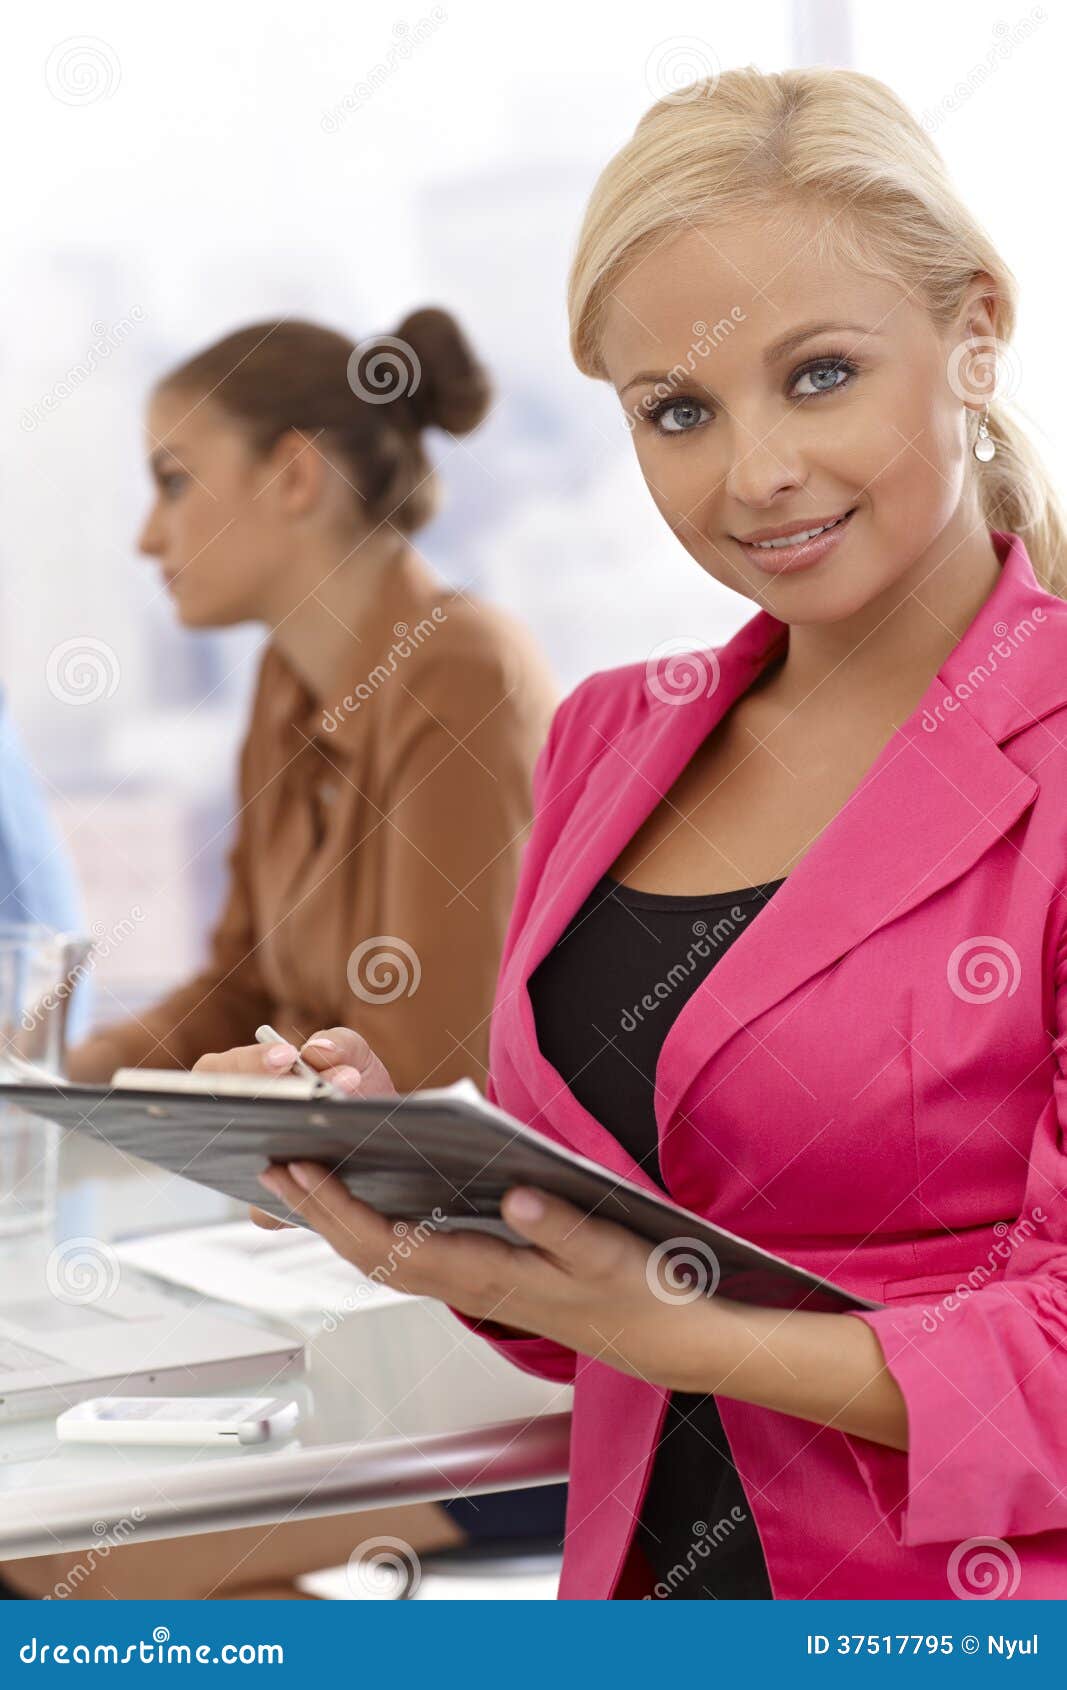 Businesswoman writing notes at meeting. Businesswoman writing notes at businessmeeting, smiling.